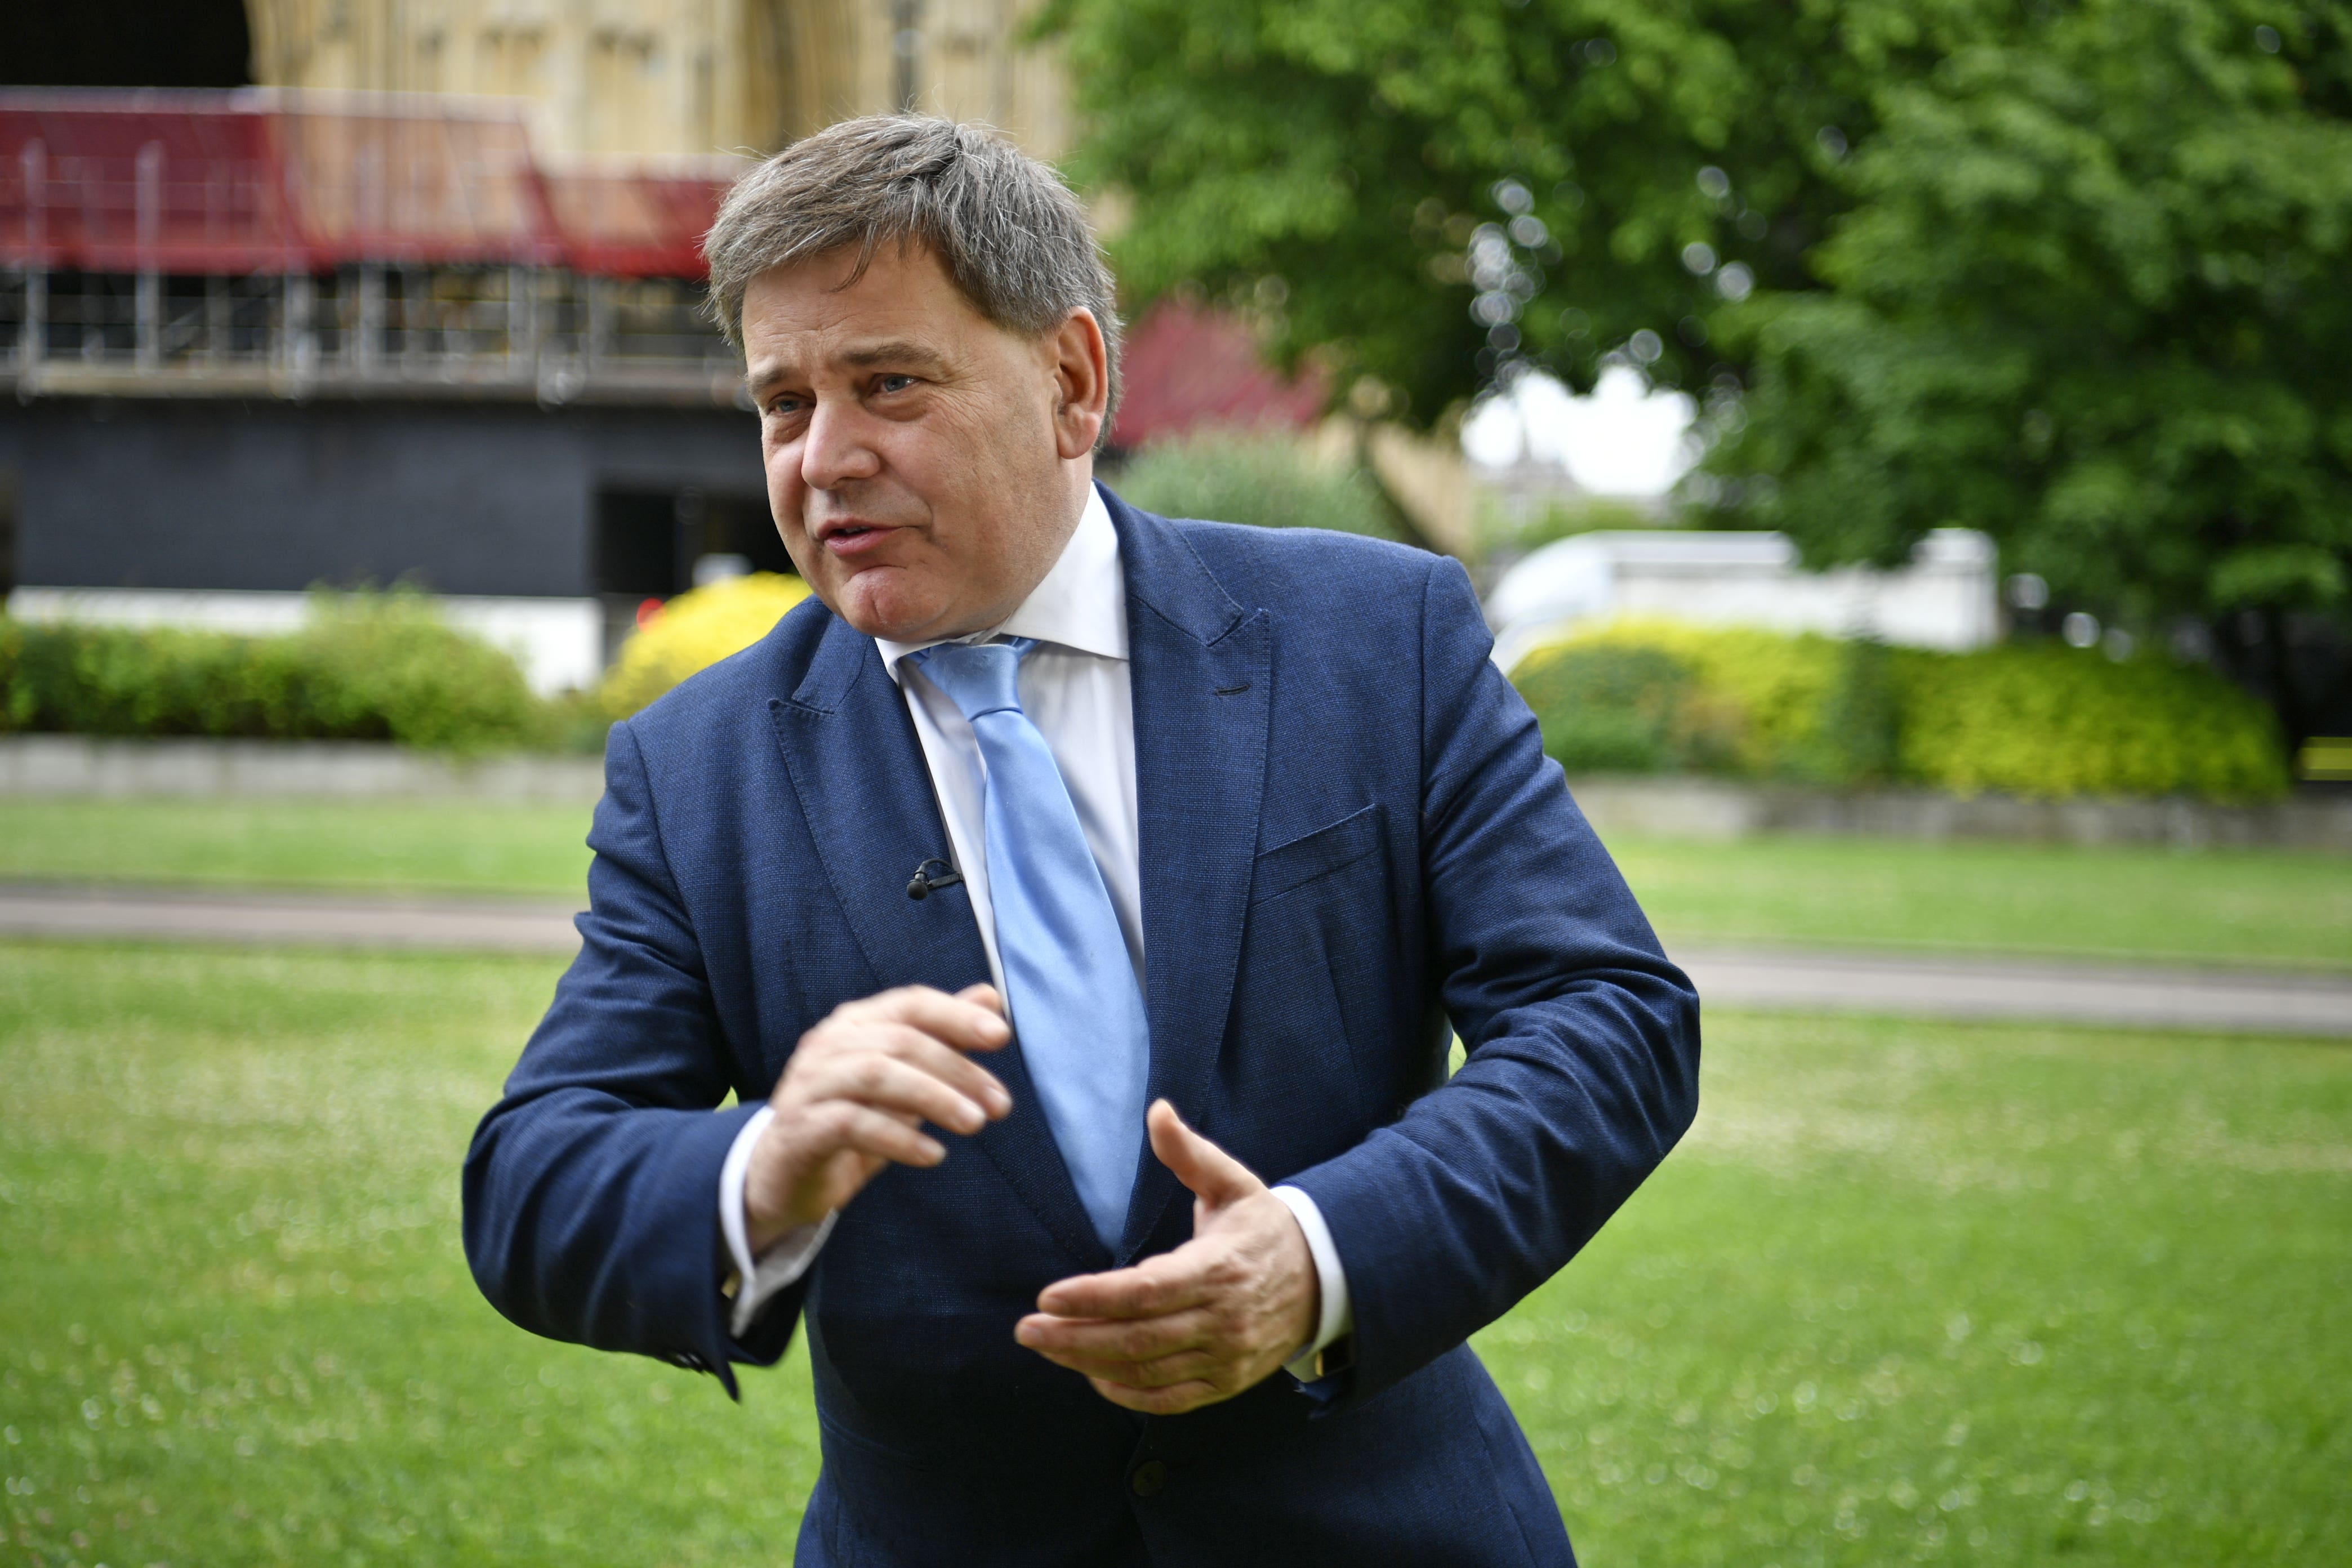 Andrew Bridgen has been MP for North West Leicestershire since 2010